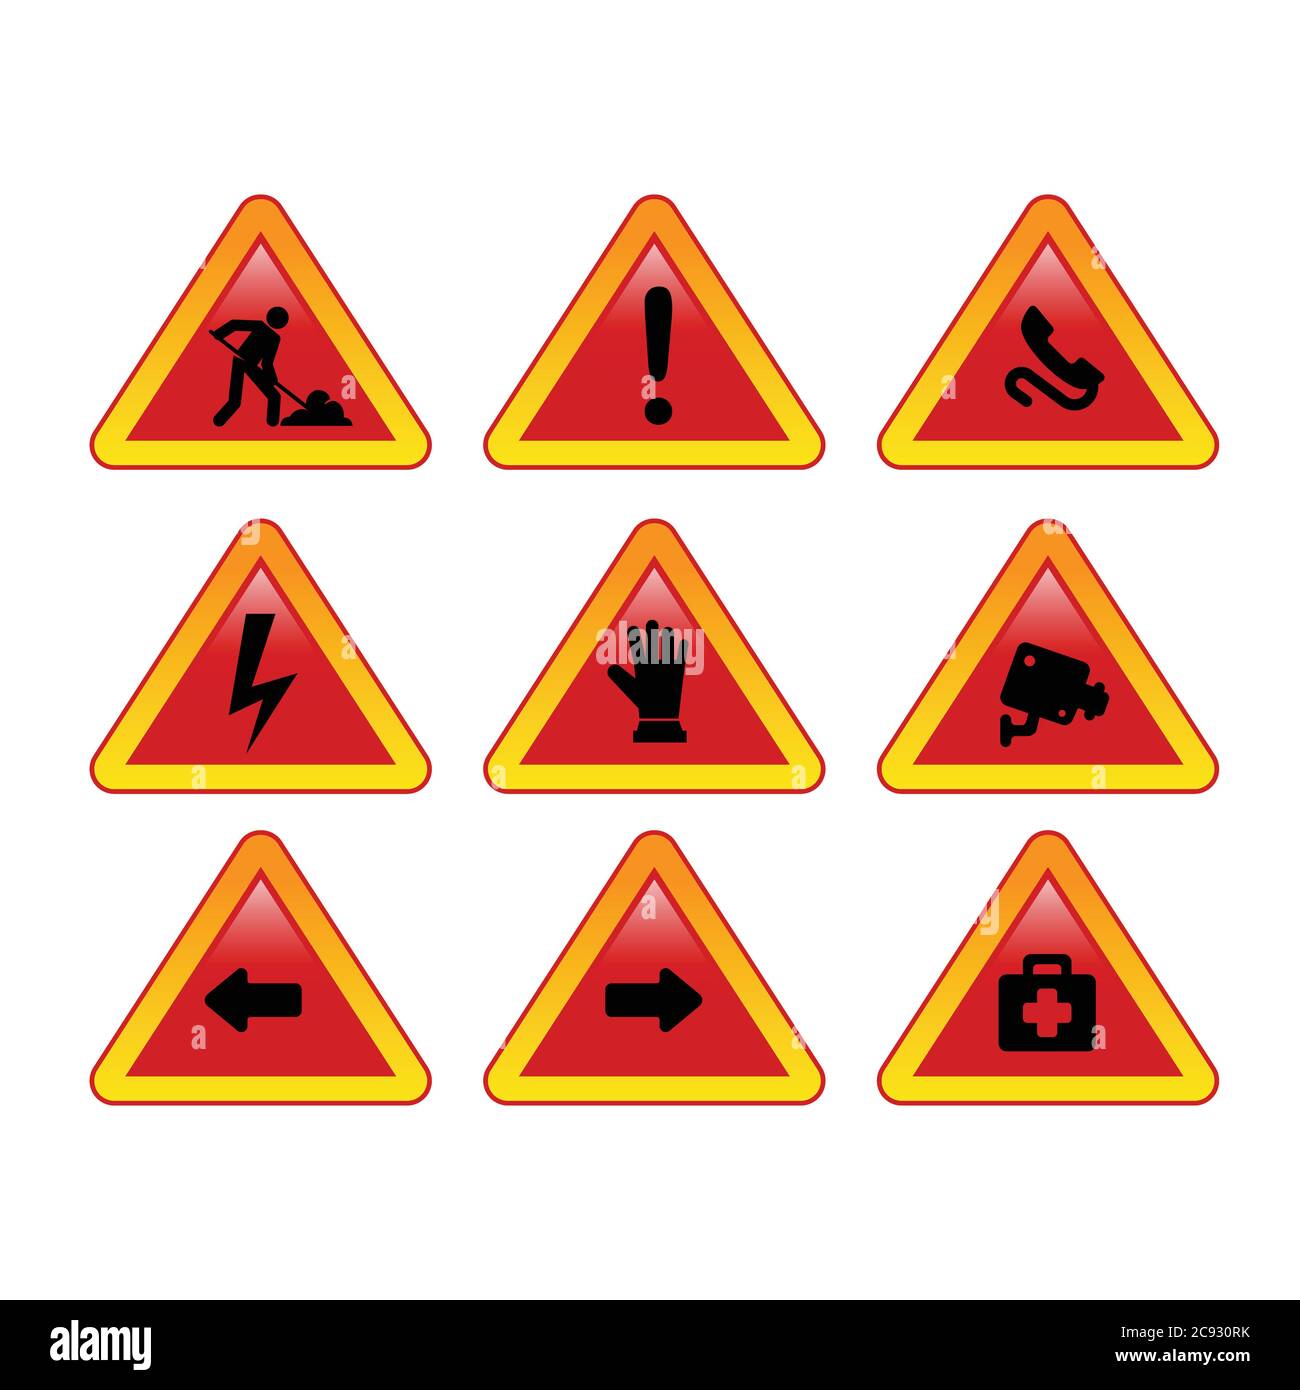 under construction website and road sign vector Stock Vector